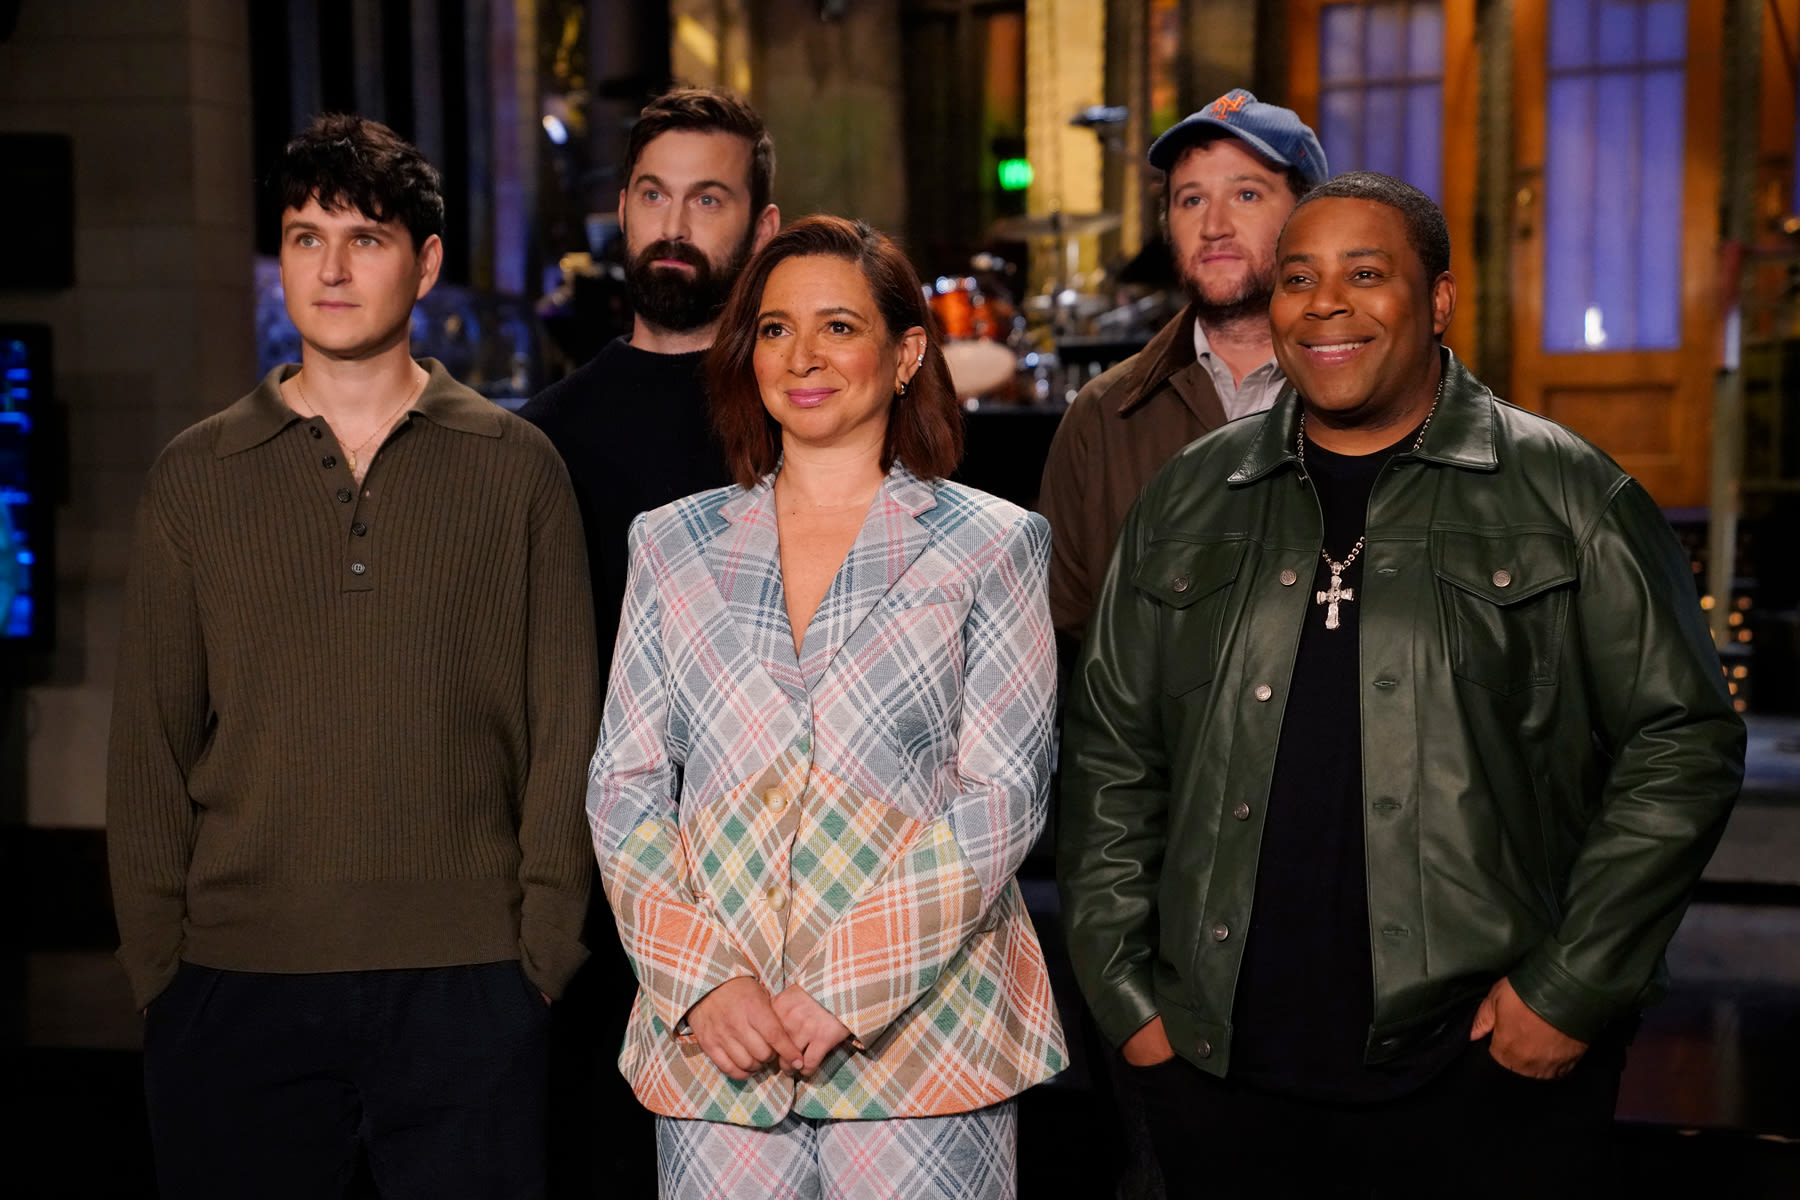 Maya Rudolph Is Hosting ‘SNL’ Tonight. This Is How to Watch the Episode Online